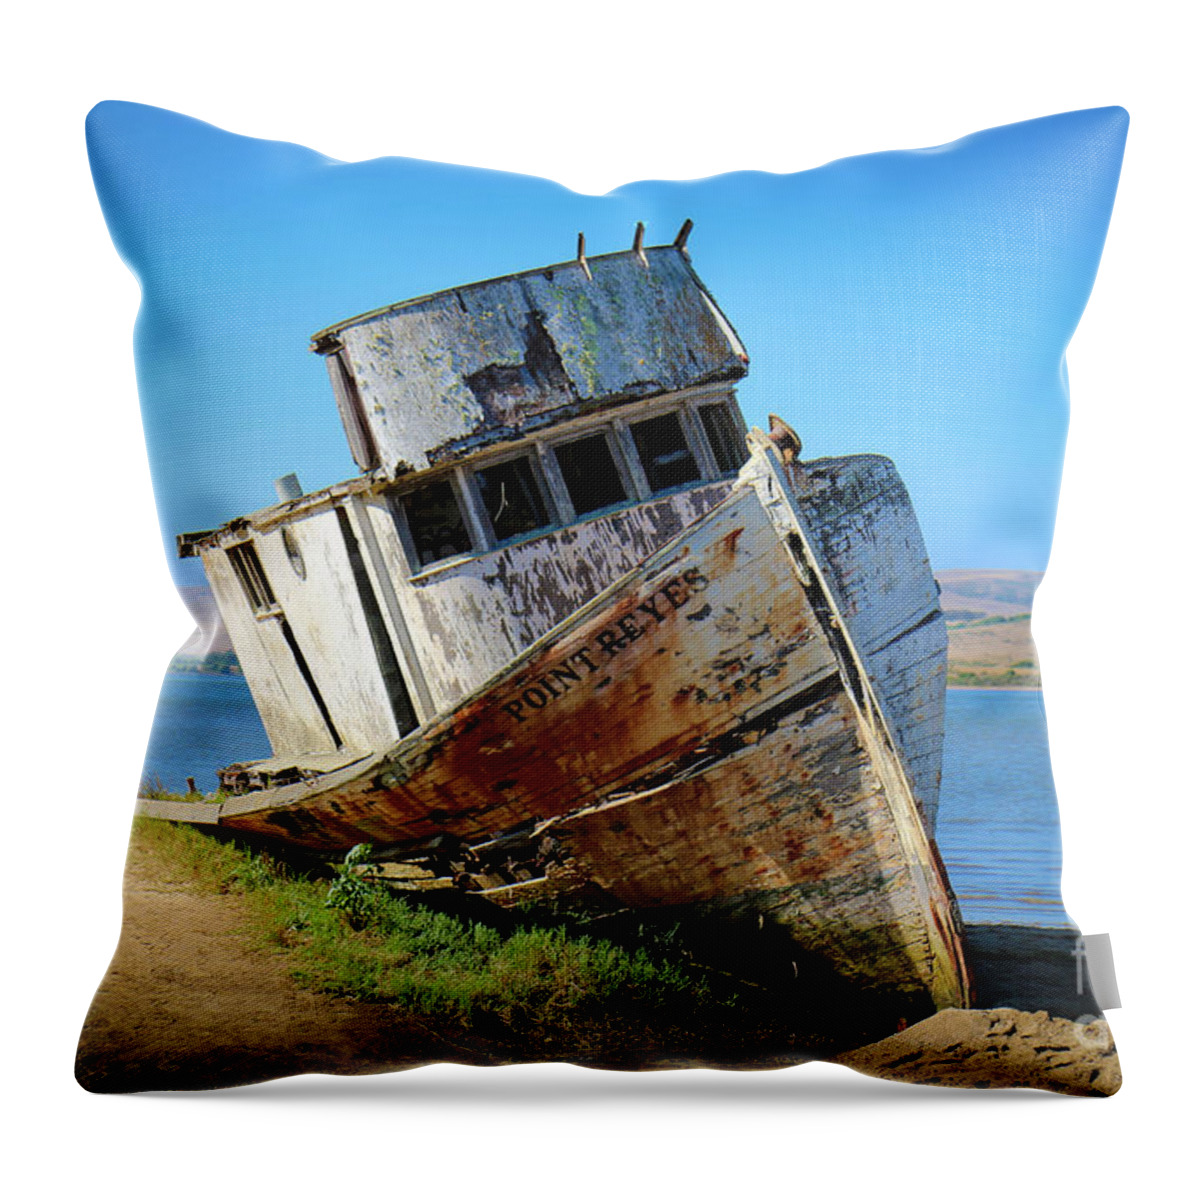 Inverness Shipwreck Throw Pillow featuring the photograph Inverness Shipwreck by Veronica Batterson